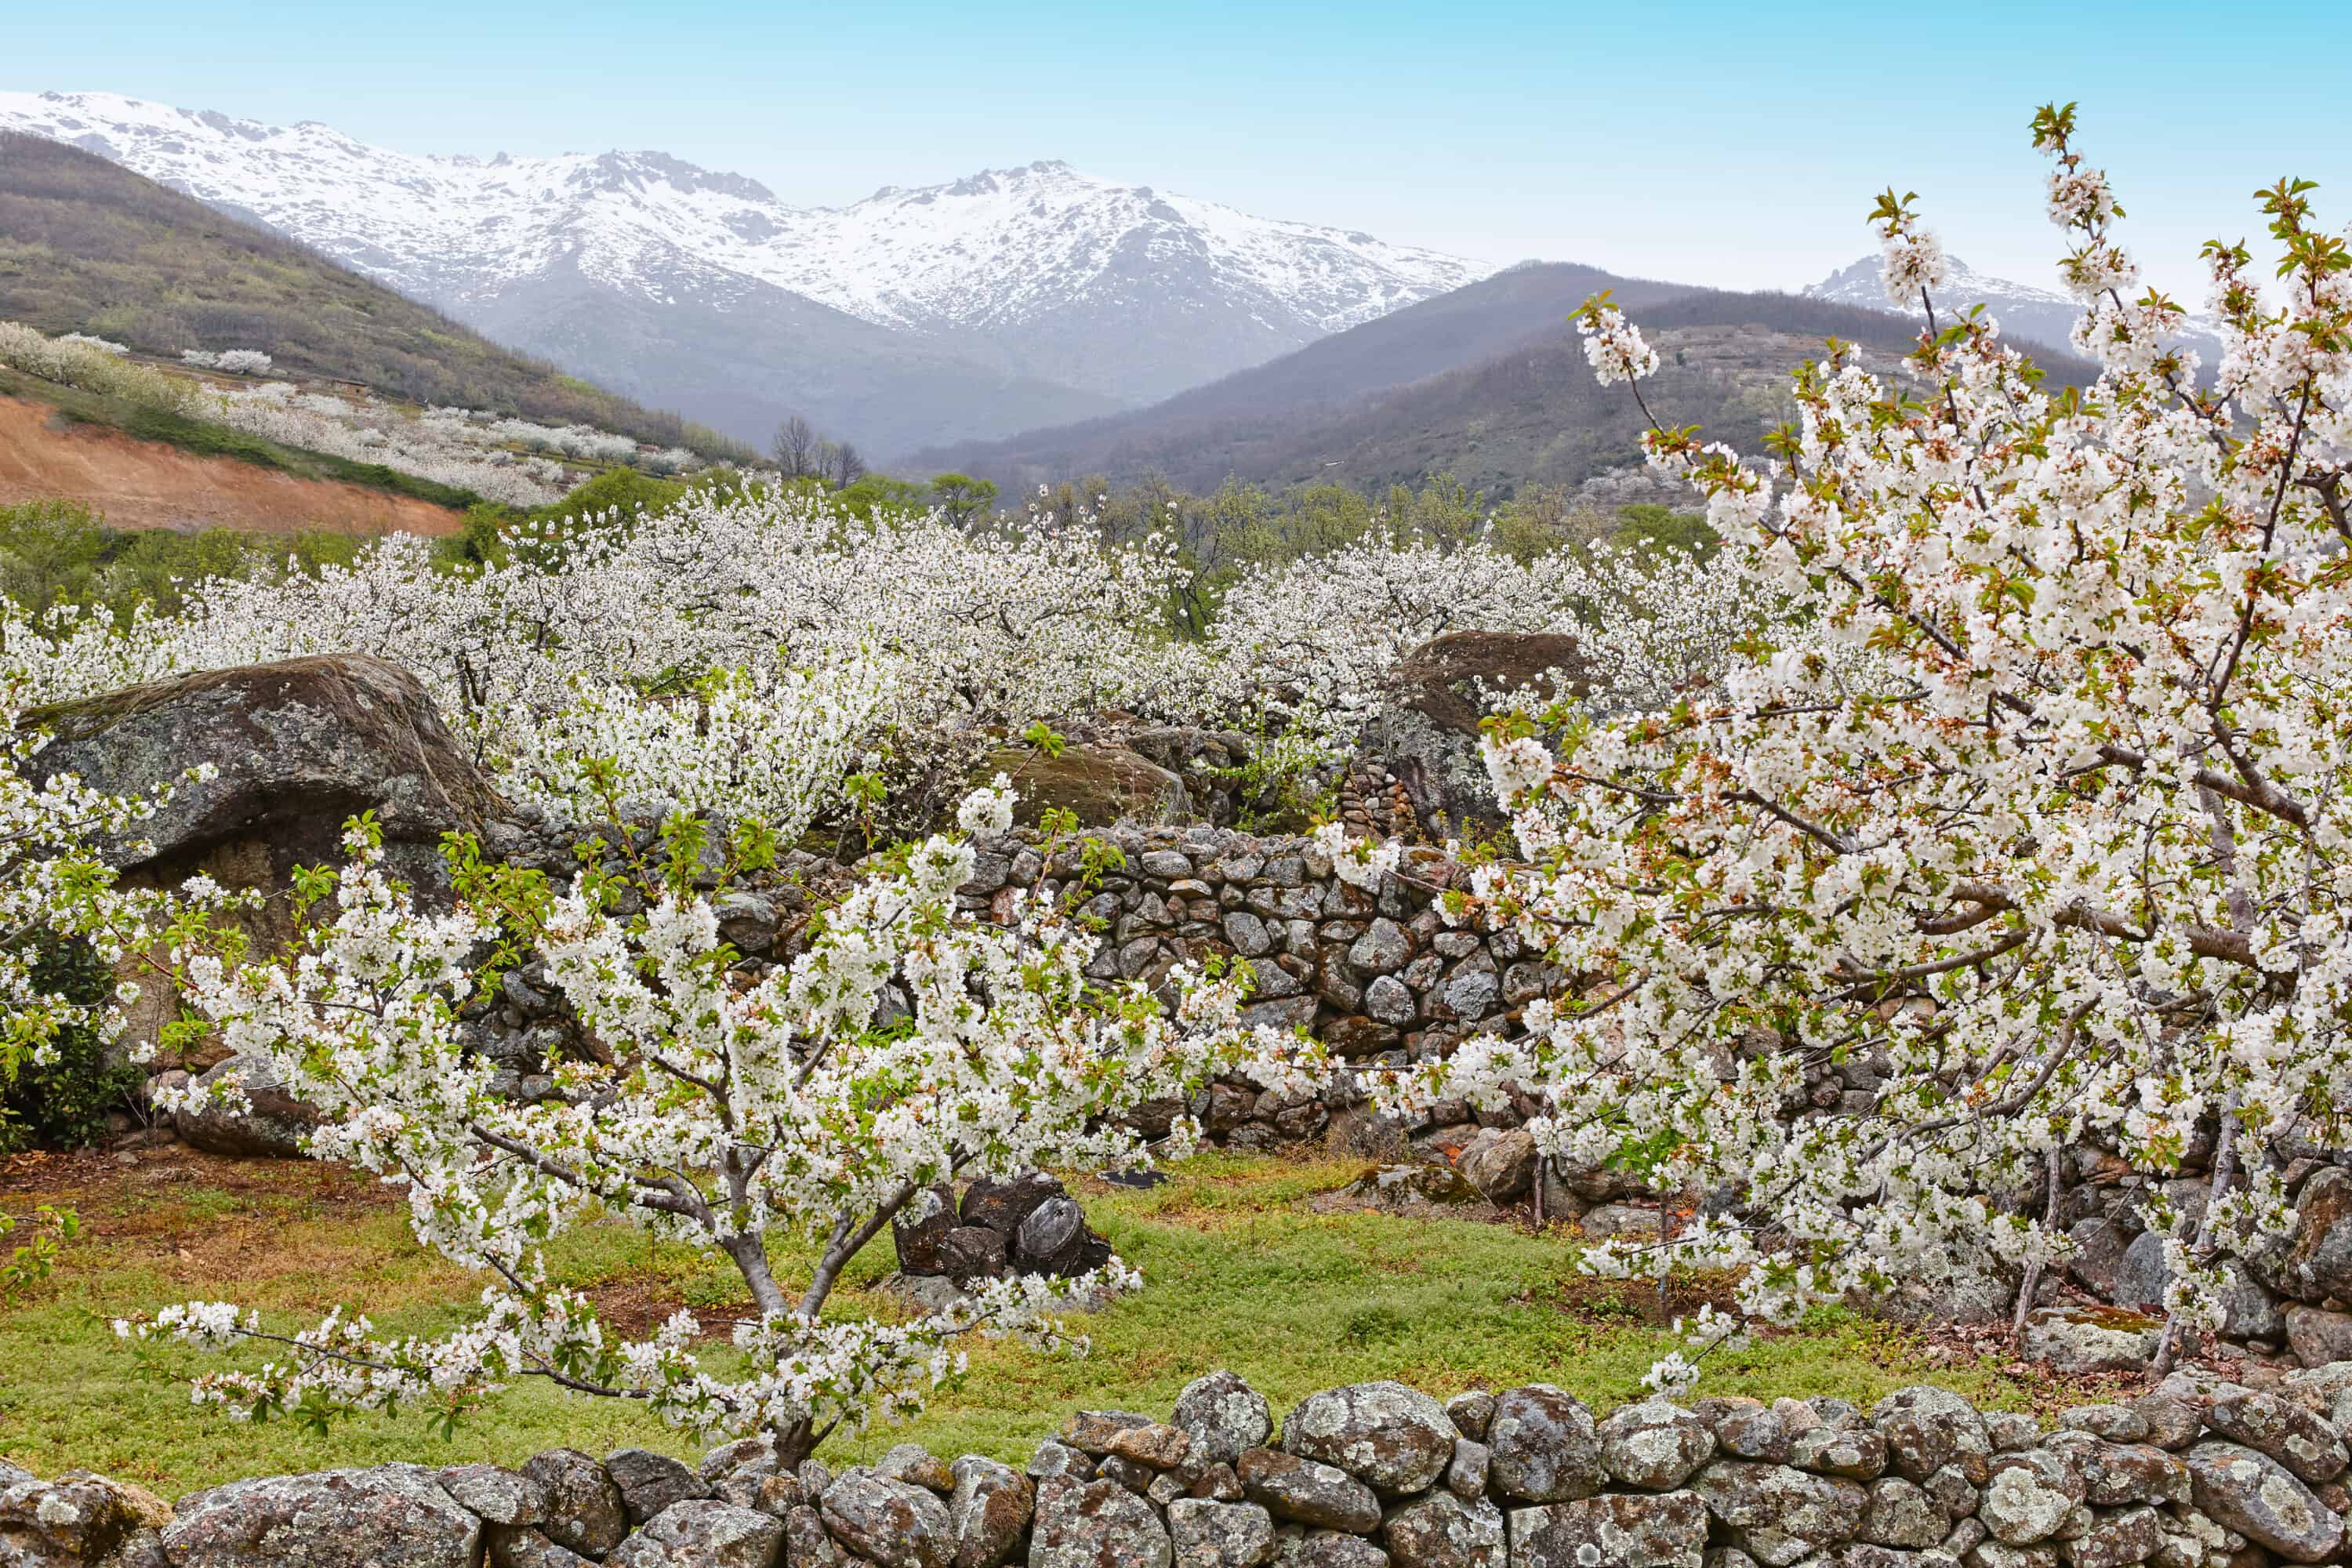 White cherry blossom trees in Jerte Valley, Spain with snow capped mountains in the background. 